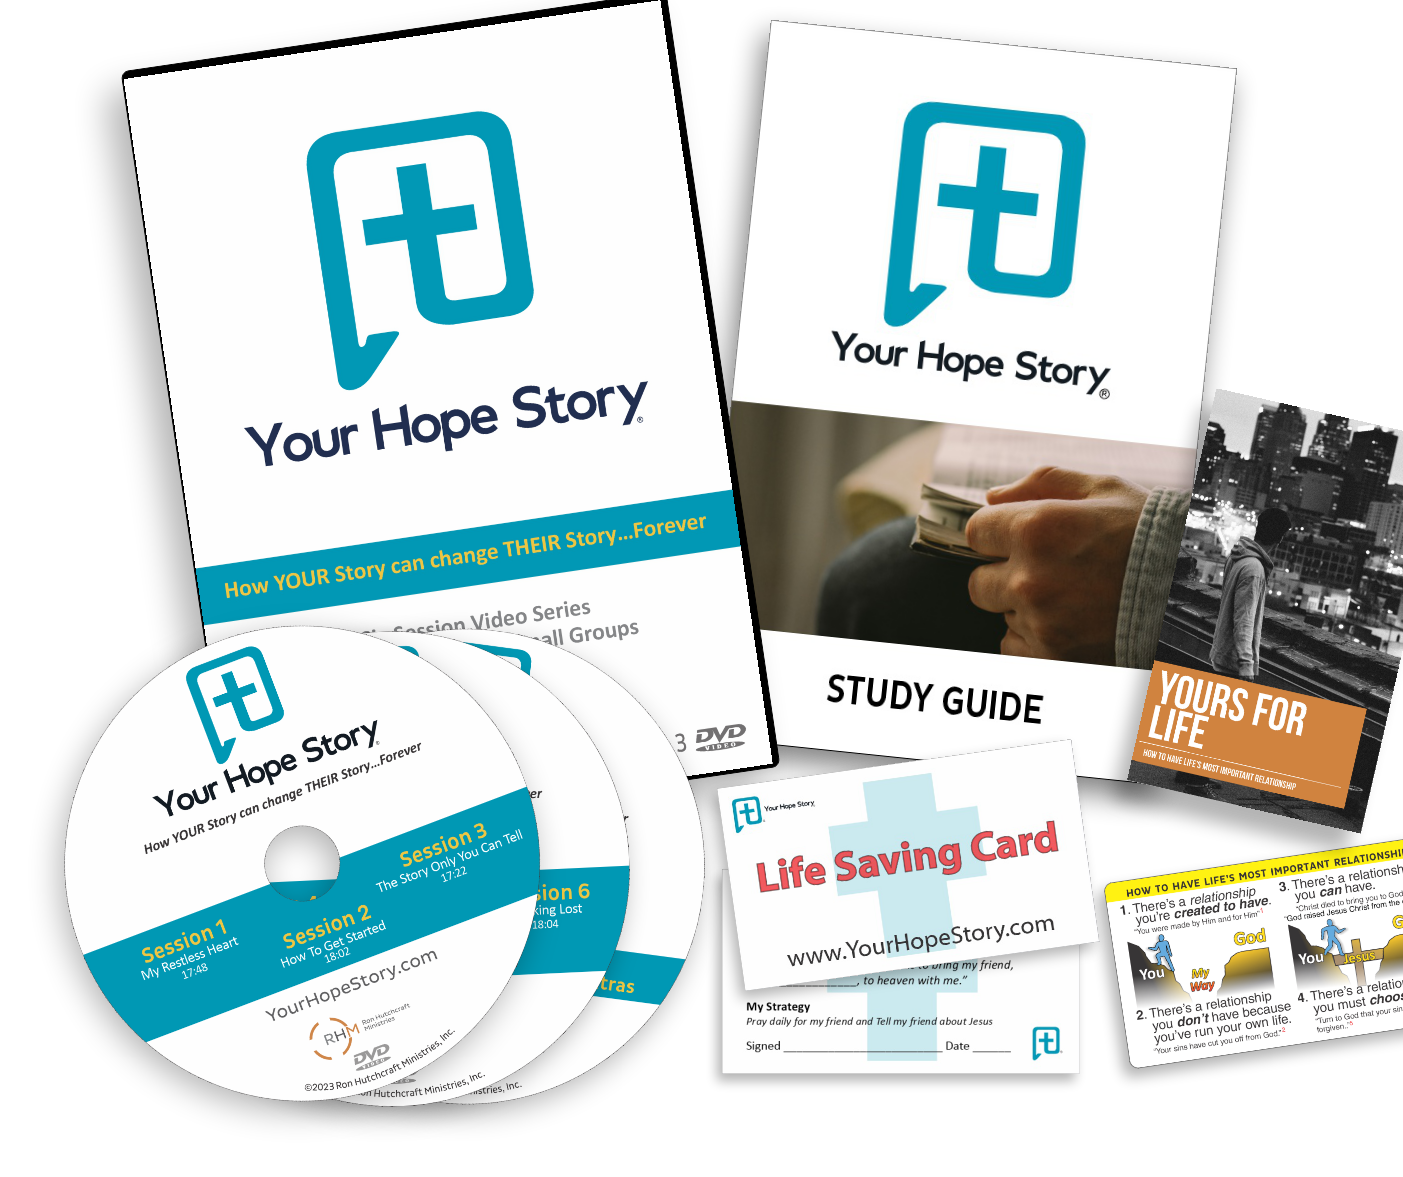 Your Hope Story Video Series